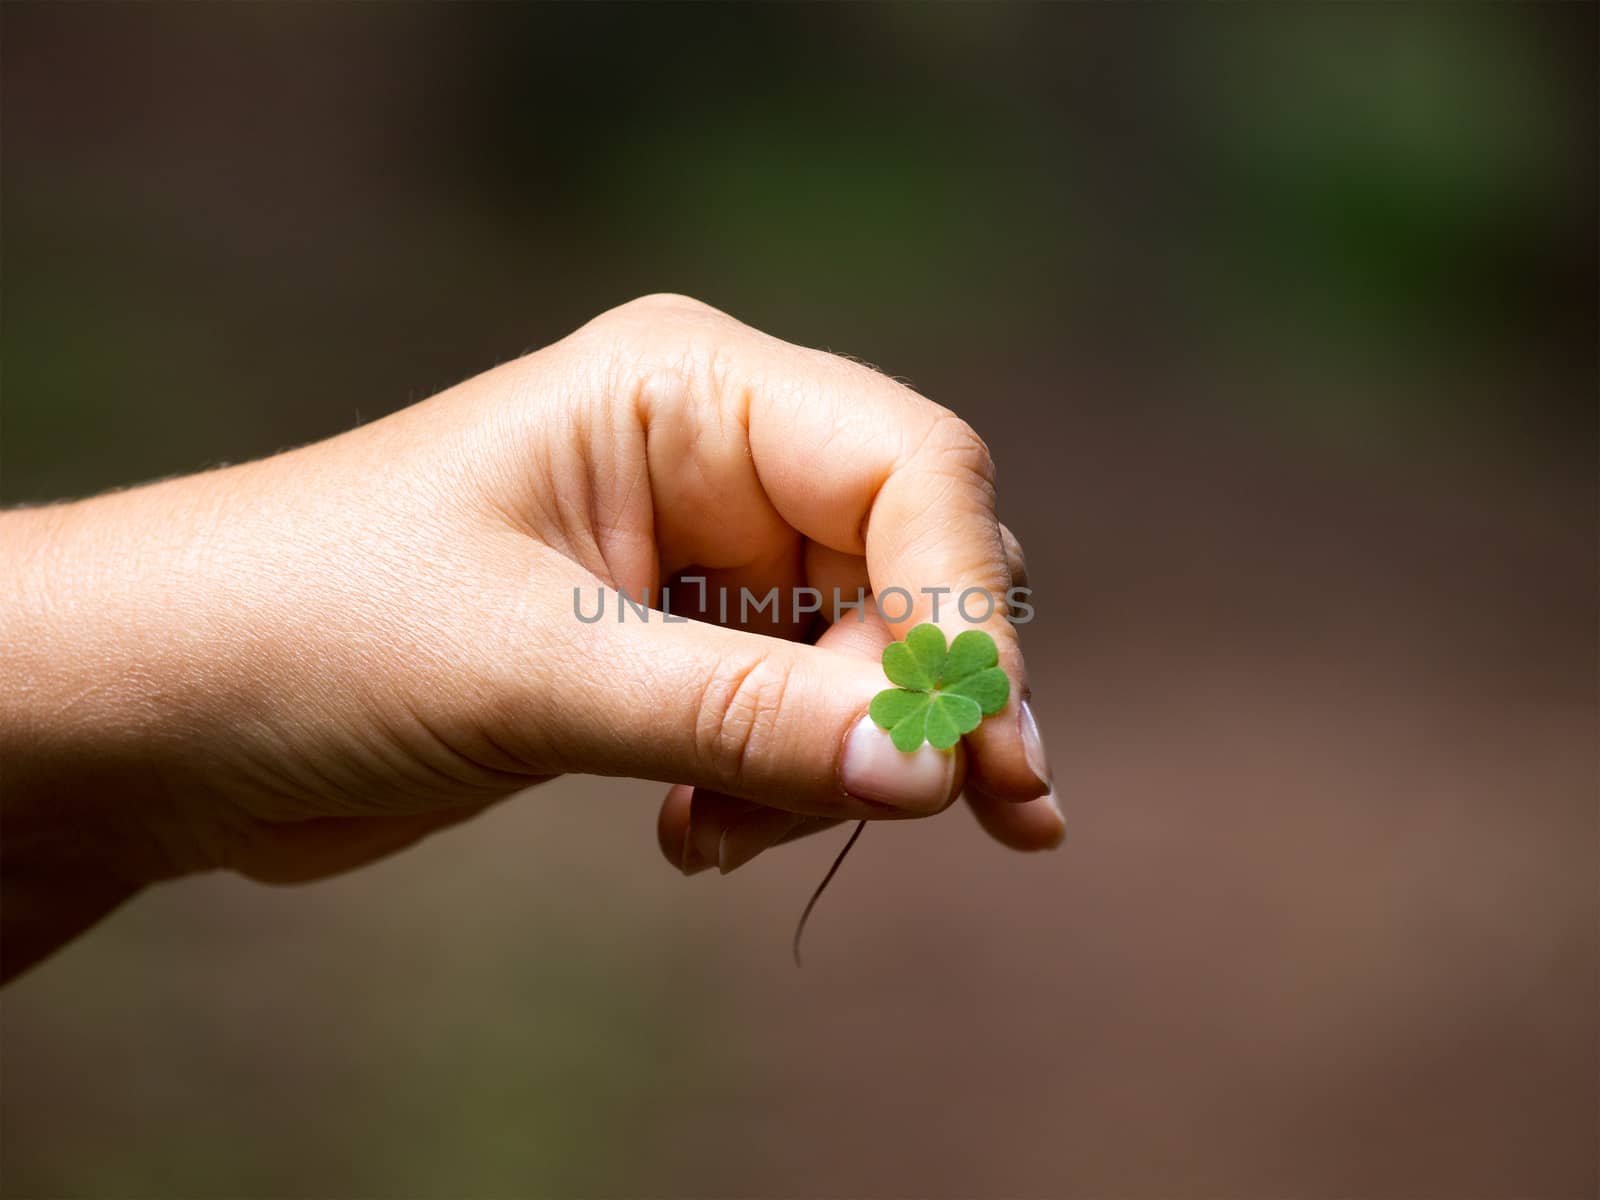 The rare find, a symbol of good luck - four-leaves clover from the Rhodope mountains forest by straannick